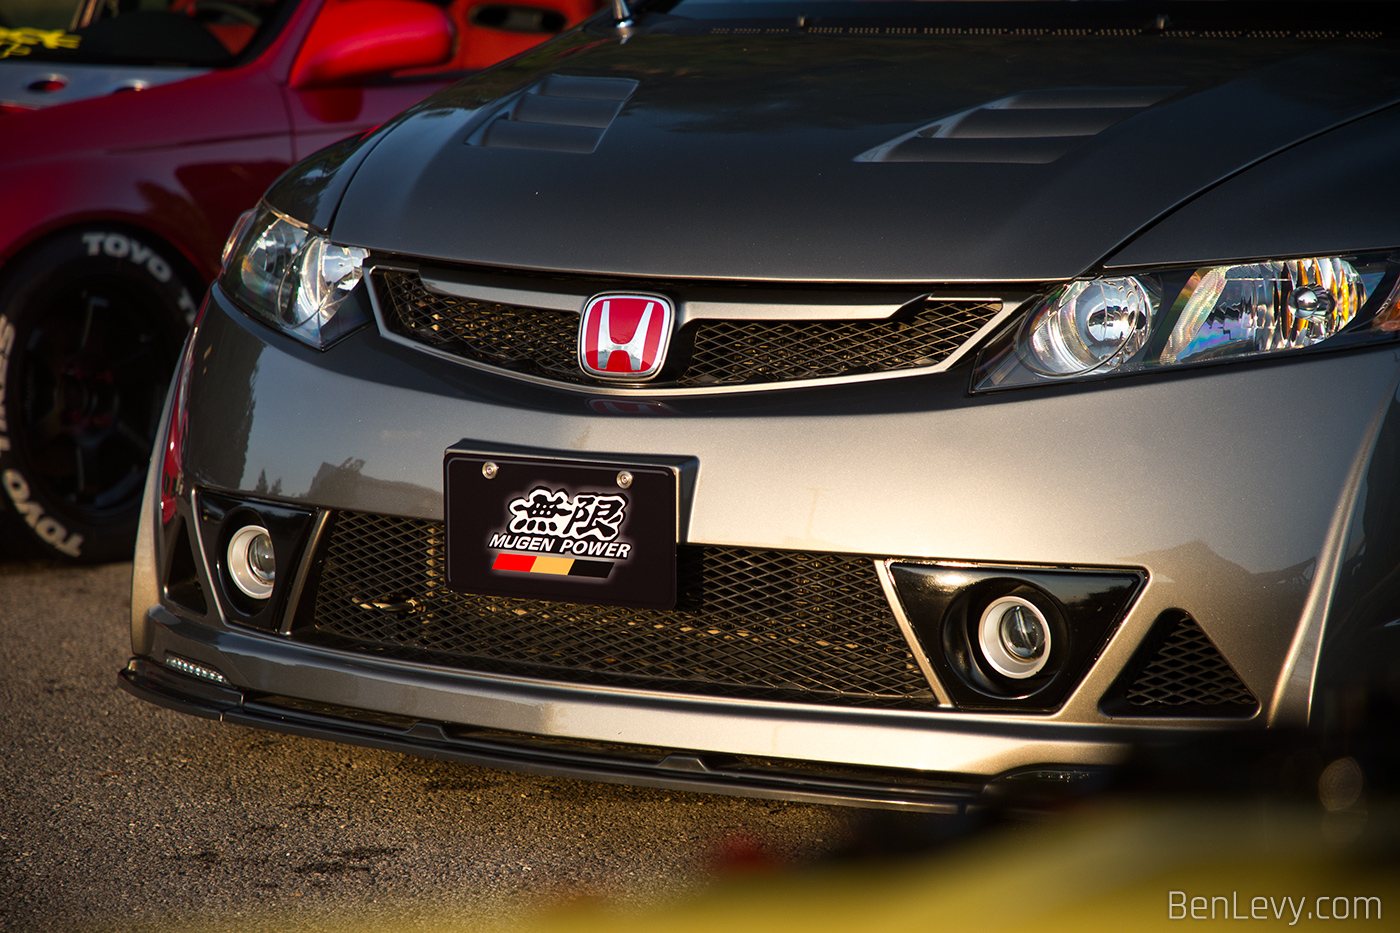 Mugen Power License Plate on front of Civic